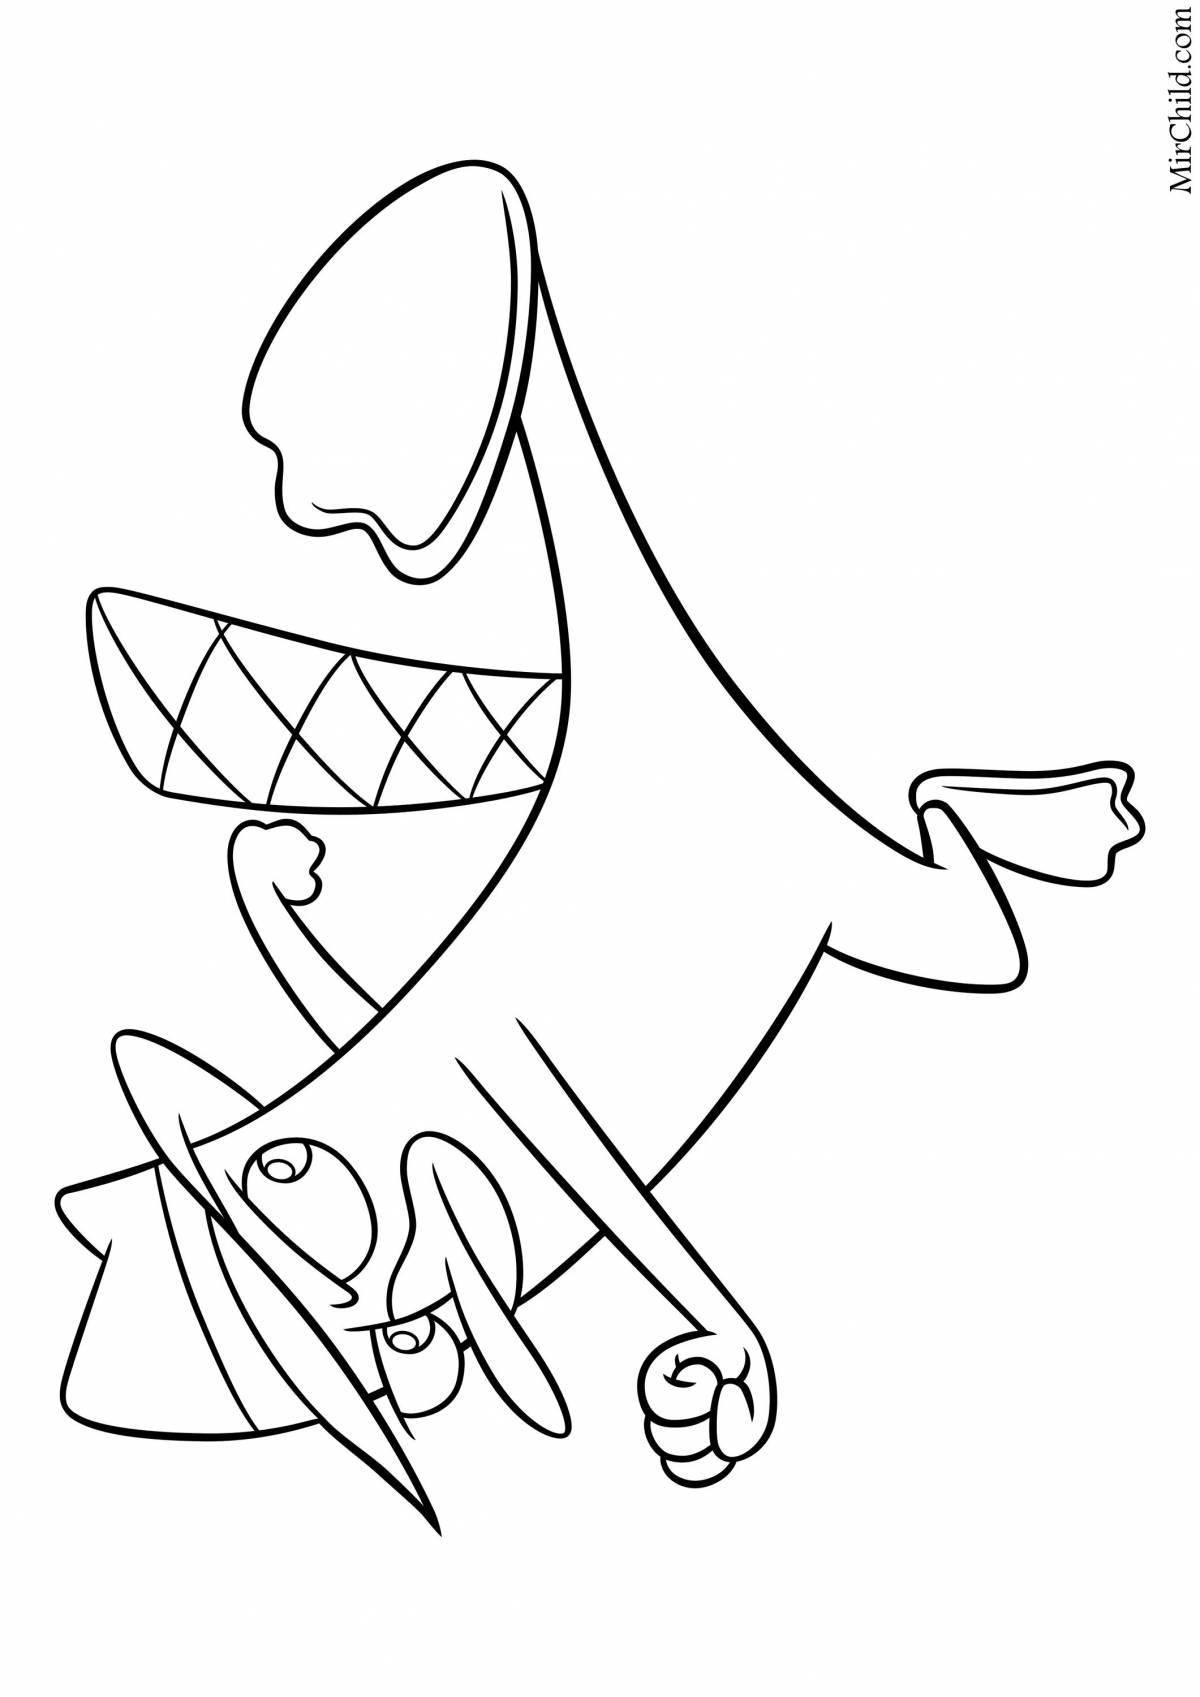 Cute perry platypus coloring book